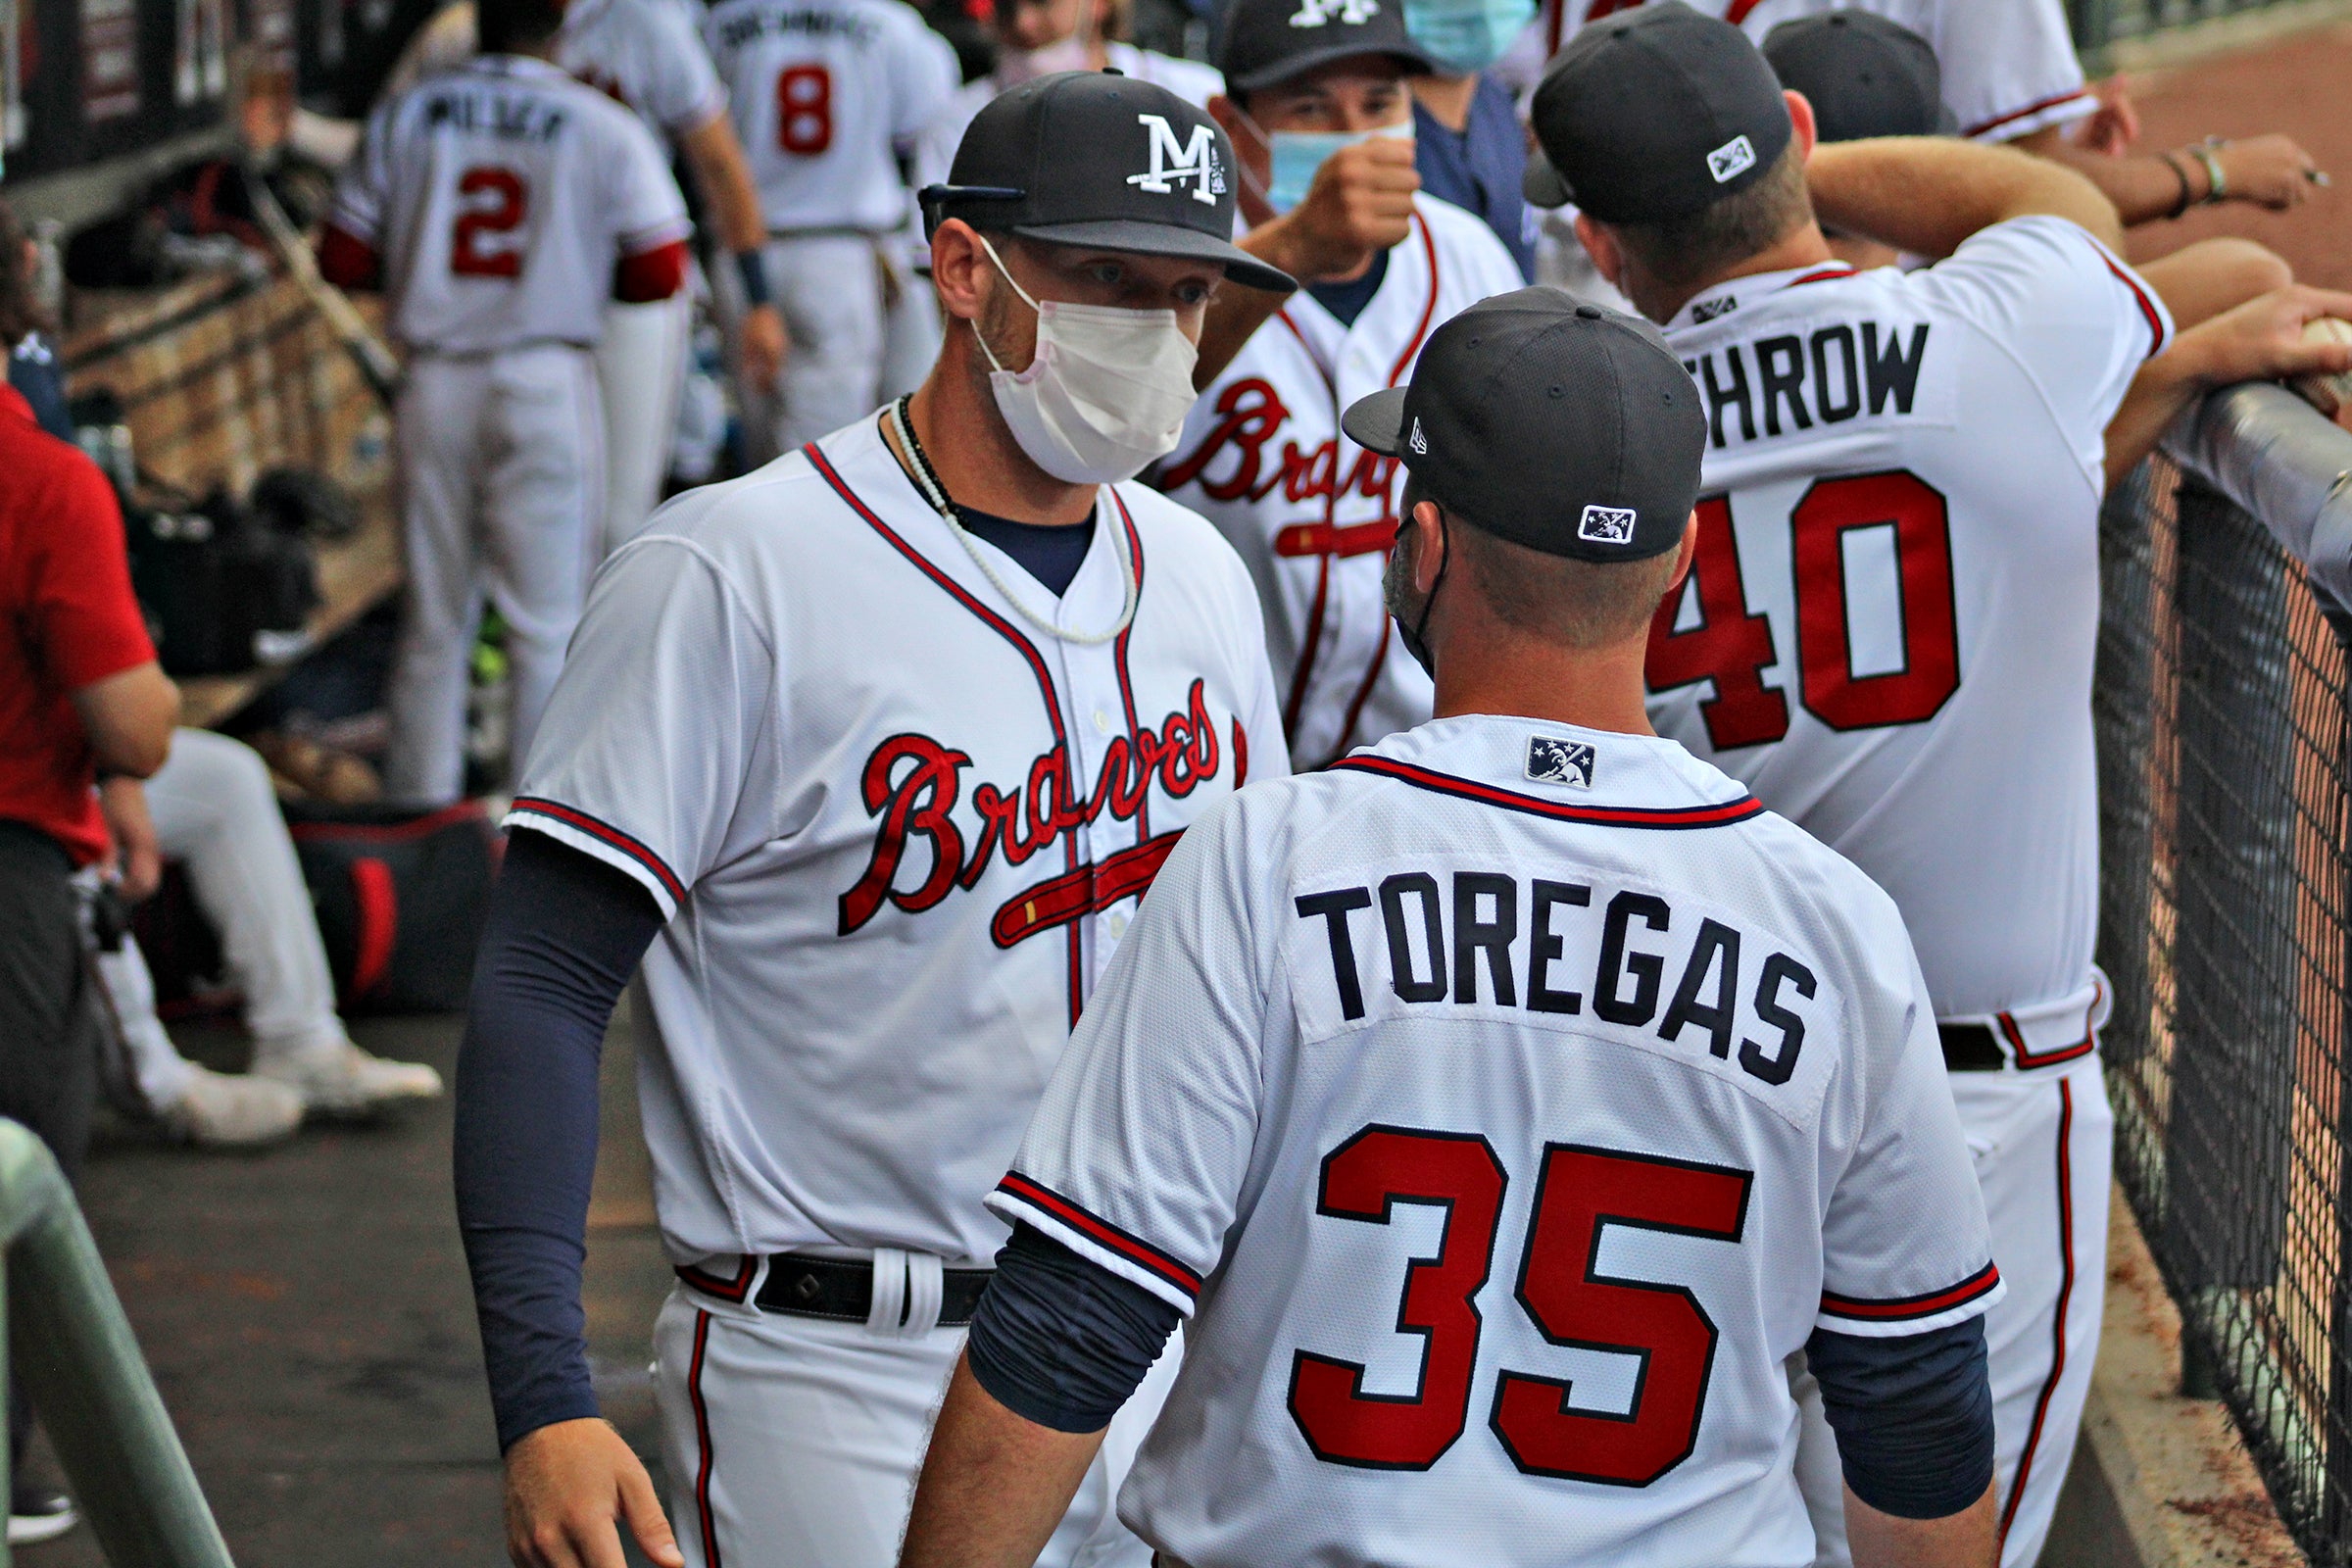 M-Braves return to the field after 612 days away - The Vicksburg